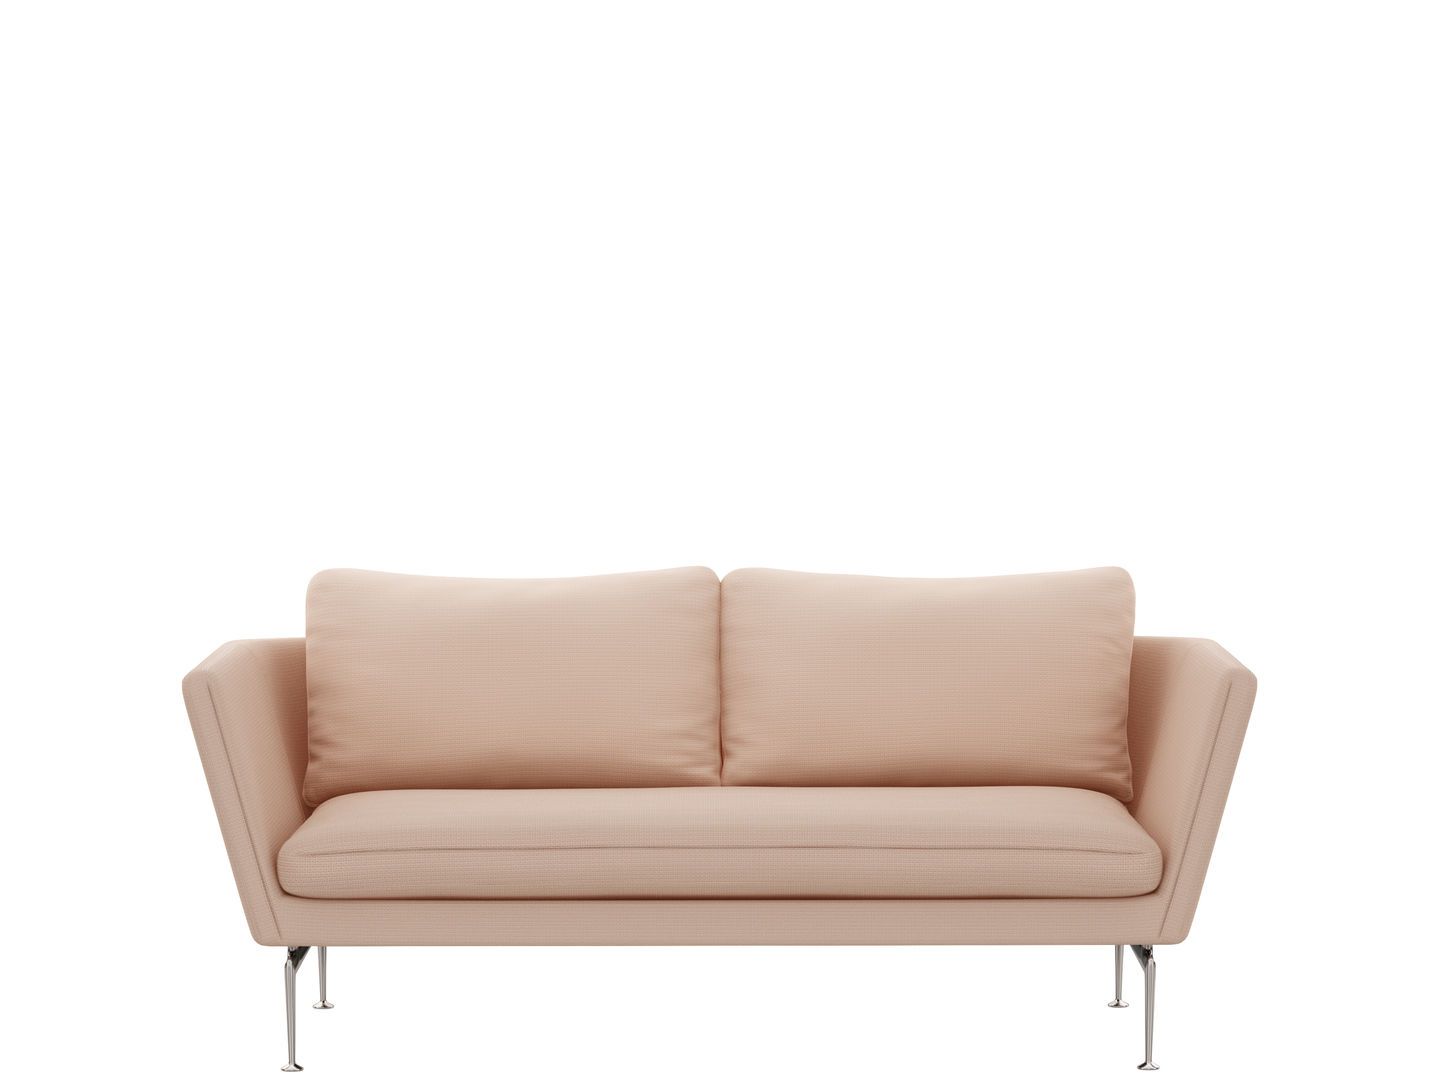 Vitra Suita 2-Seater Classic Sofa from One52 Furniture